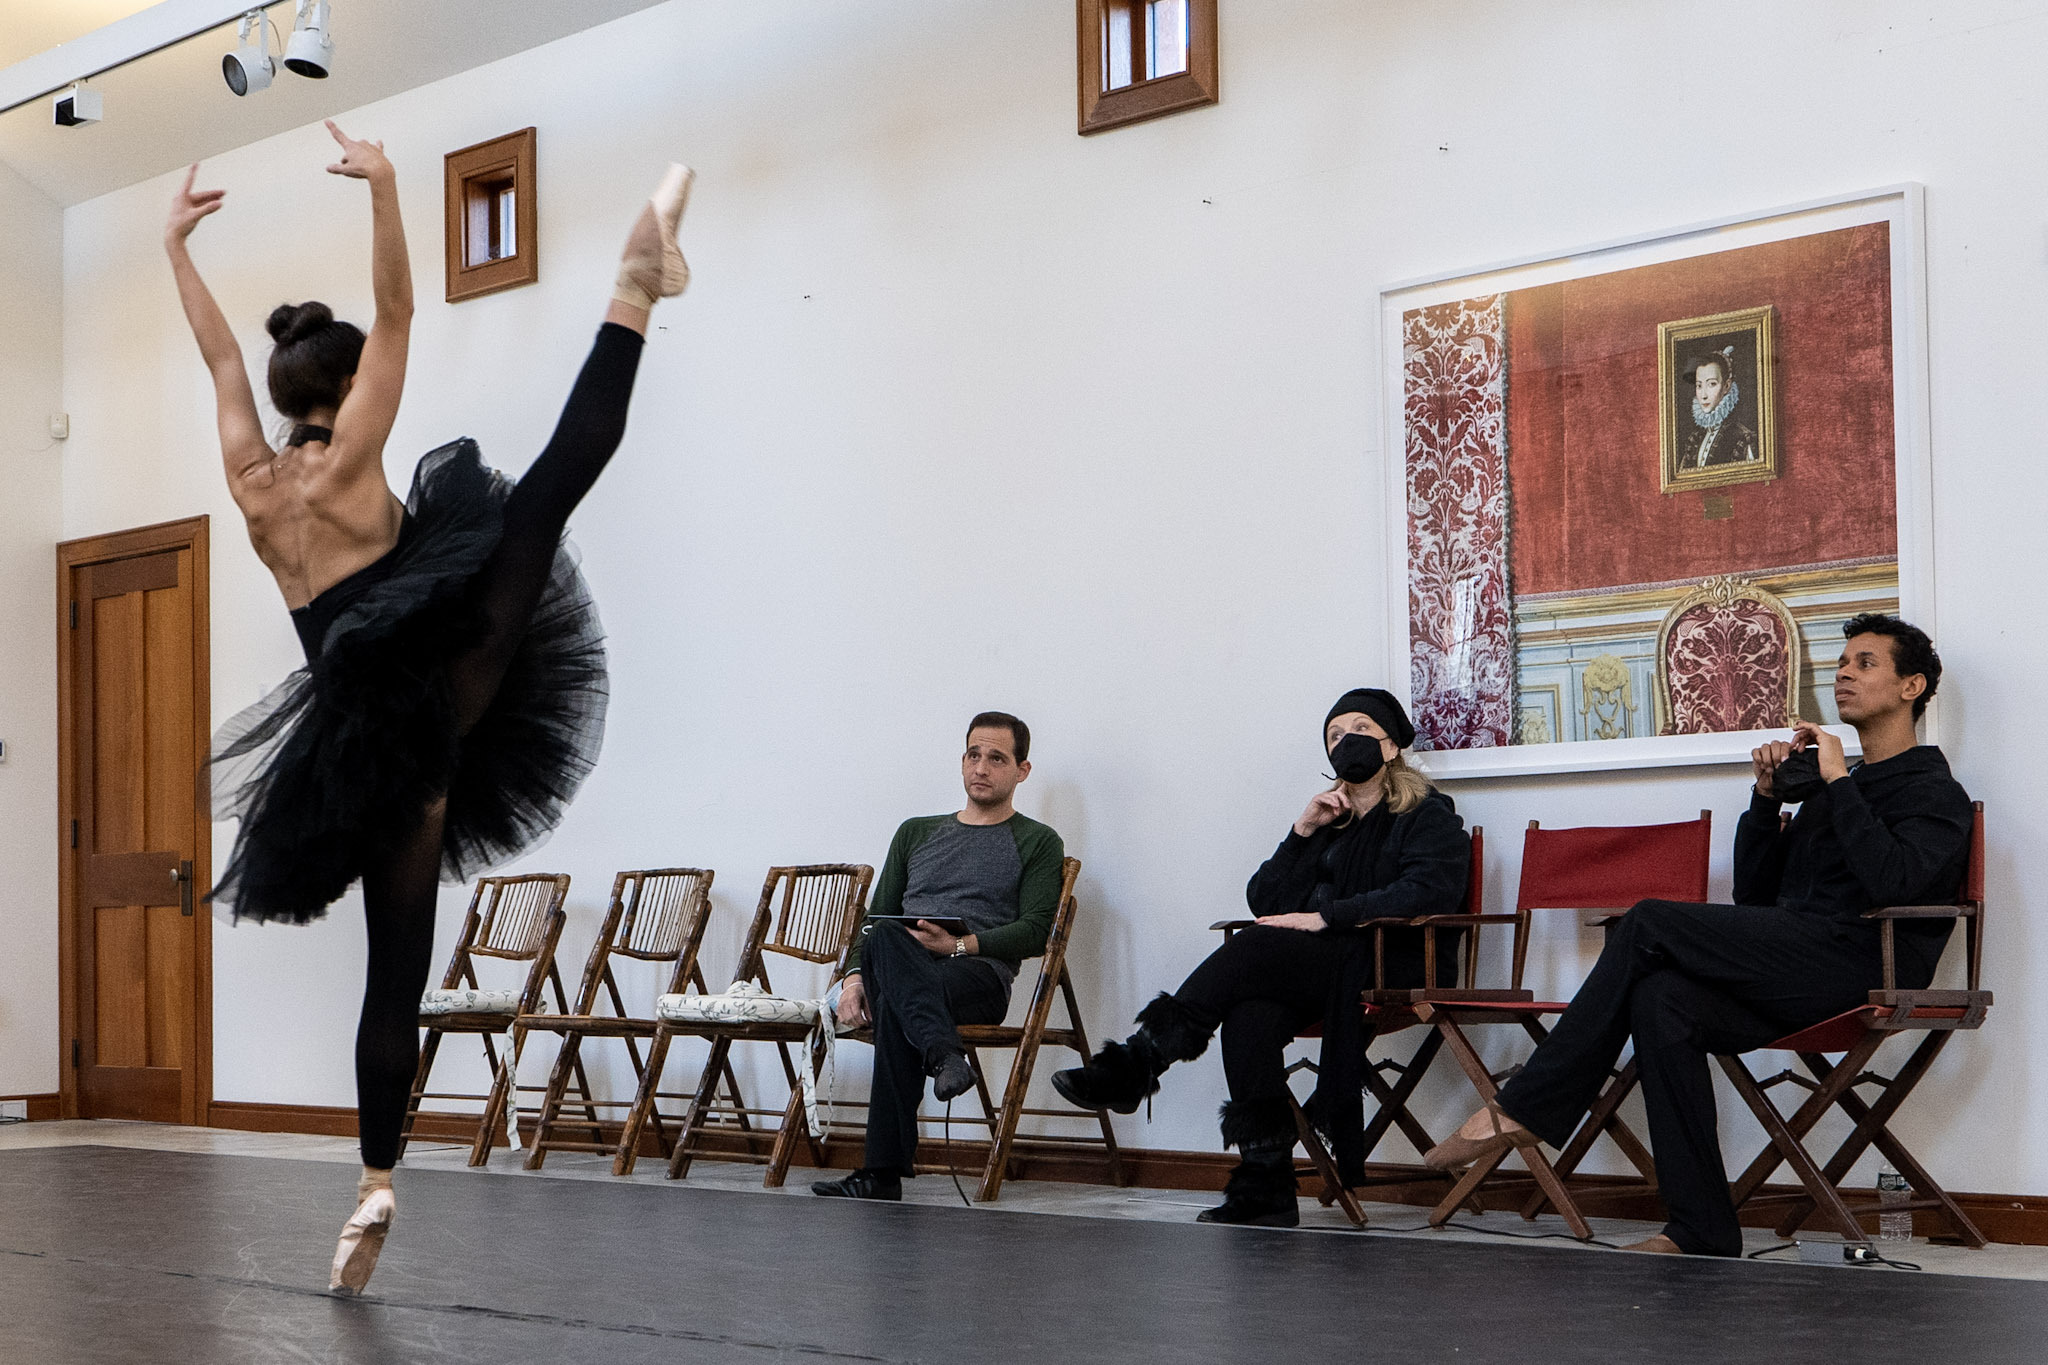 Hamptons Dance Project in rehearsal at the Guild Hall William P. Rayner Artist-in-Residence studio with creative mentor Susan Stroman. Pictured: Dancer Lauren Bonfiglio is observed by Craig Salstein, Susan Stroman and Jose Sebastian. © JOE BRONDO FOR GUILD HALL